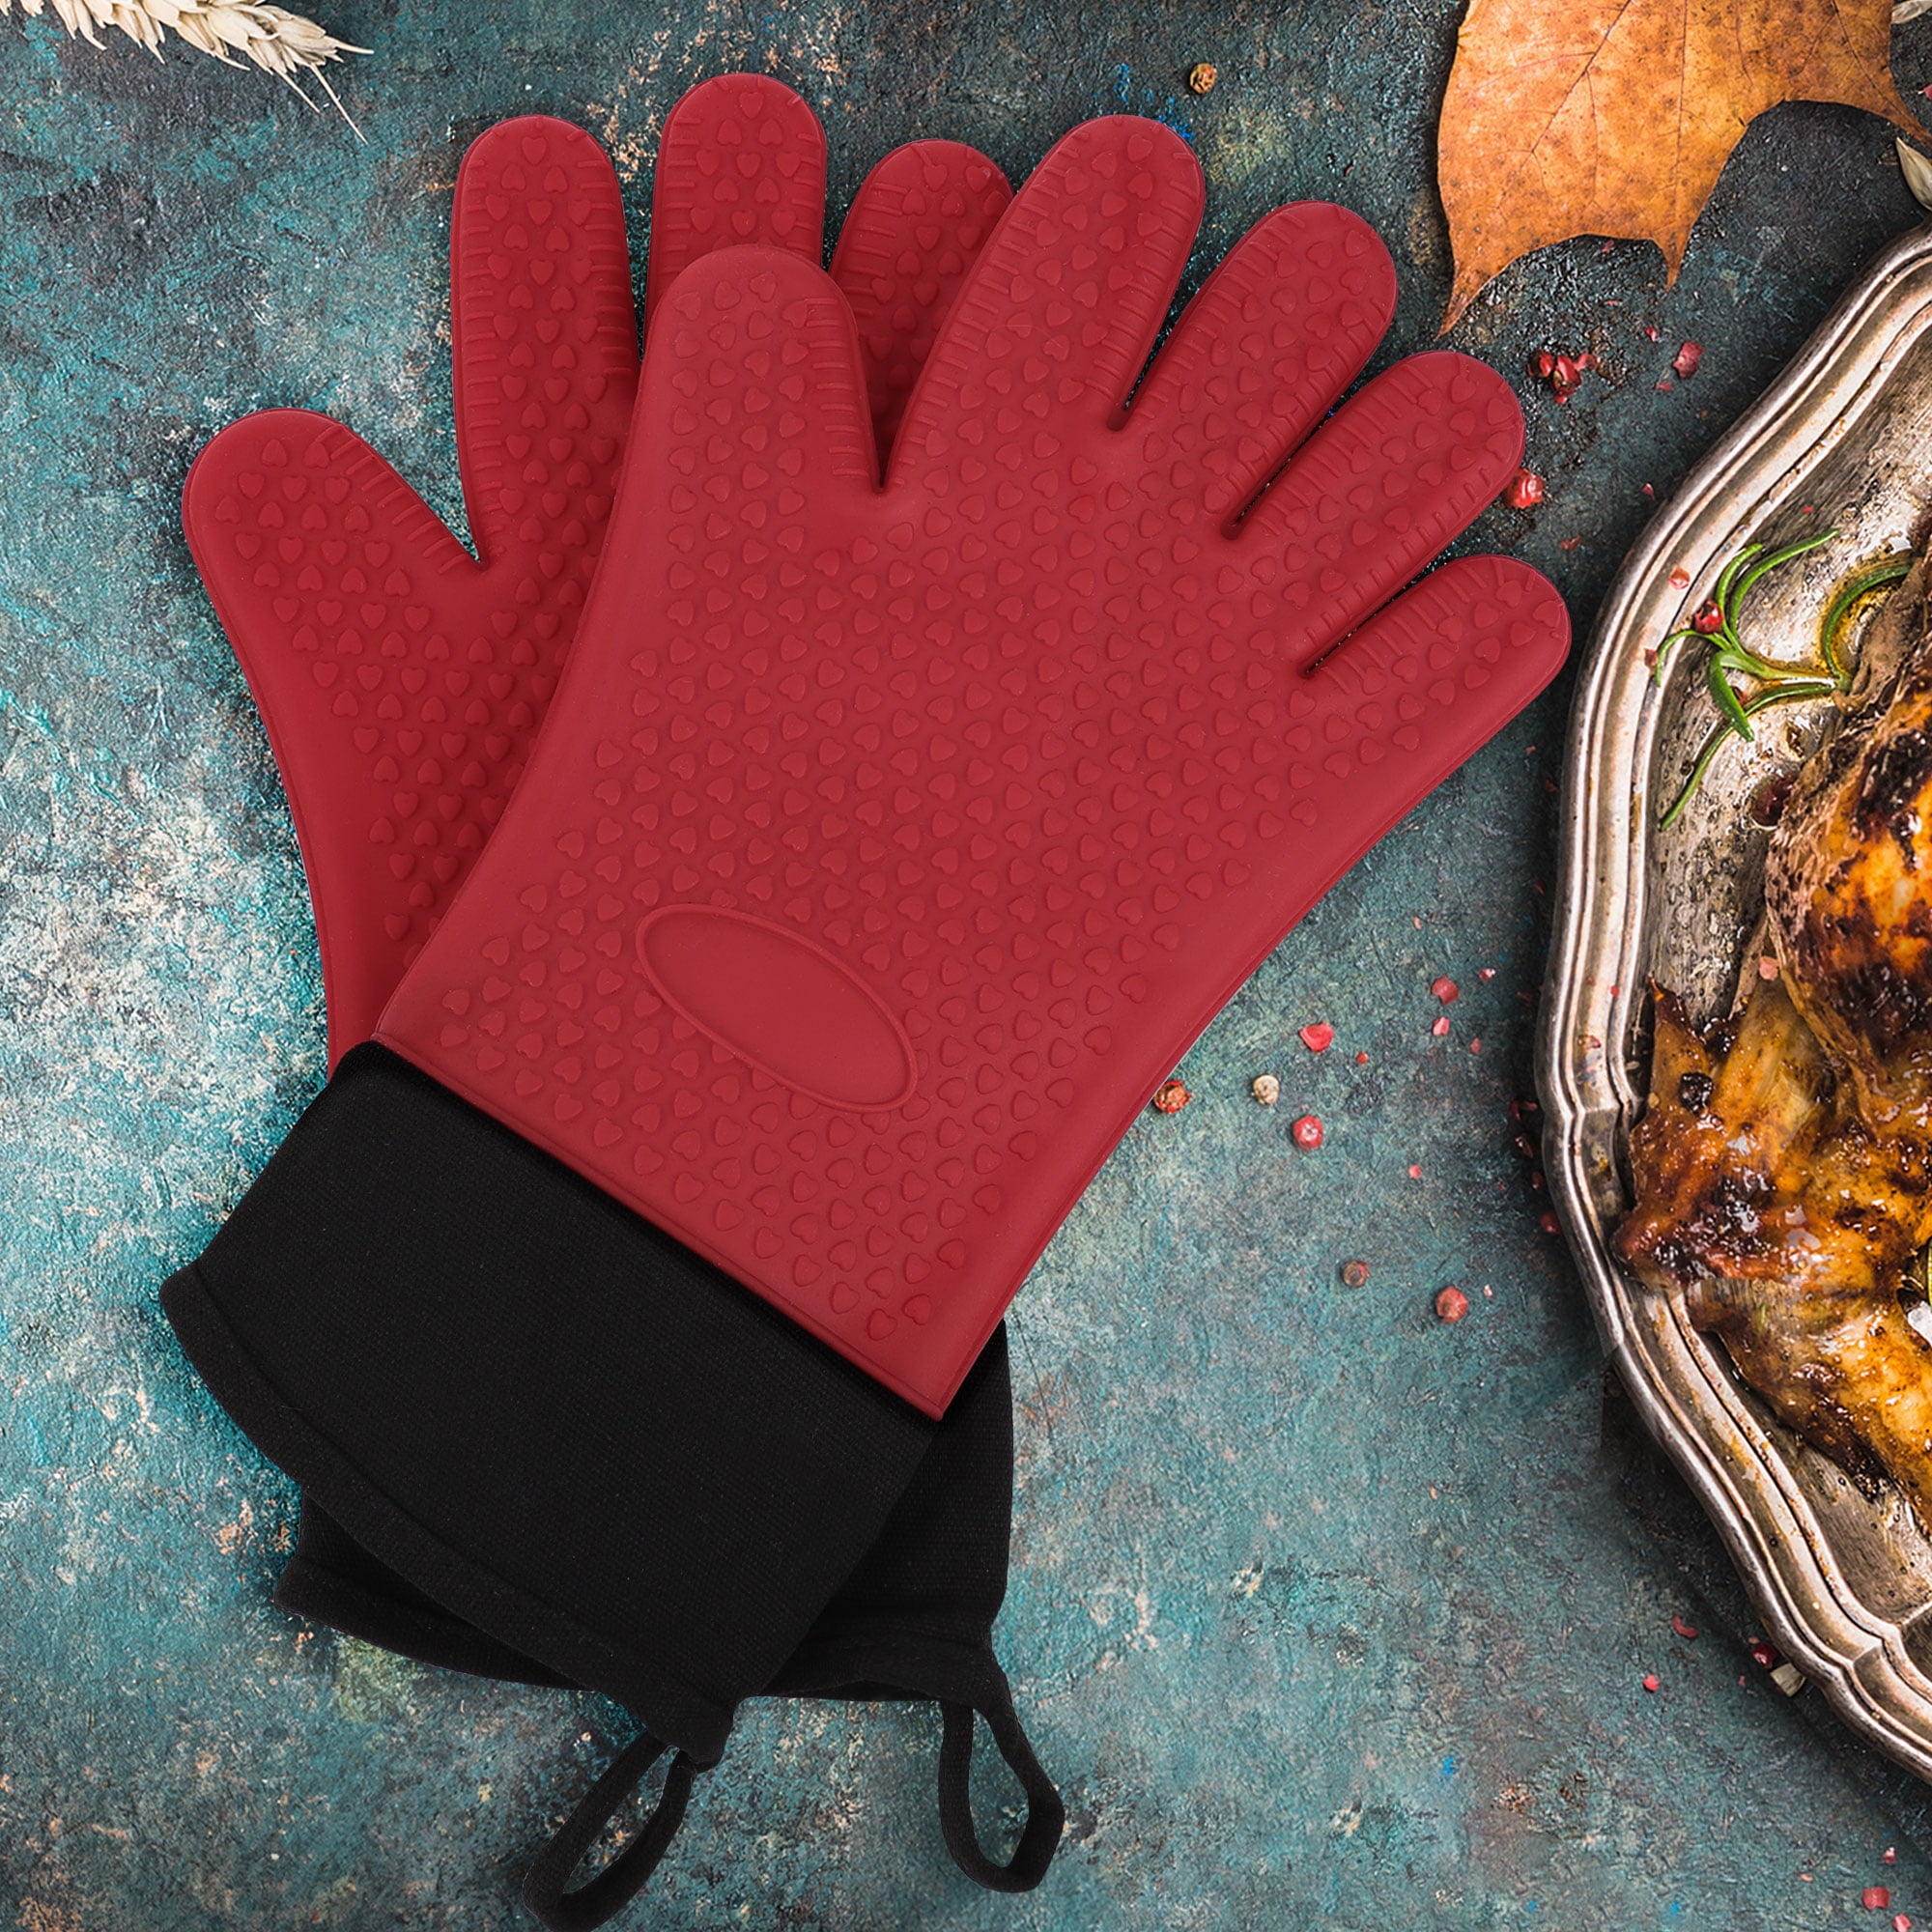 Large Kitchen Glove Heat Resistant up to 480F Terry Cloth Lined Cotton and Silicone Mitts w/ Hanging Loop Big Red House Double Oven Gloves Red 